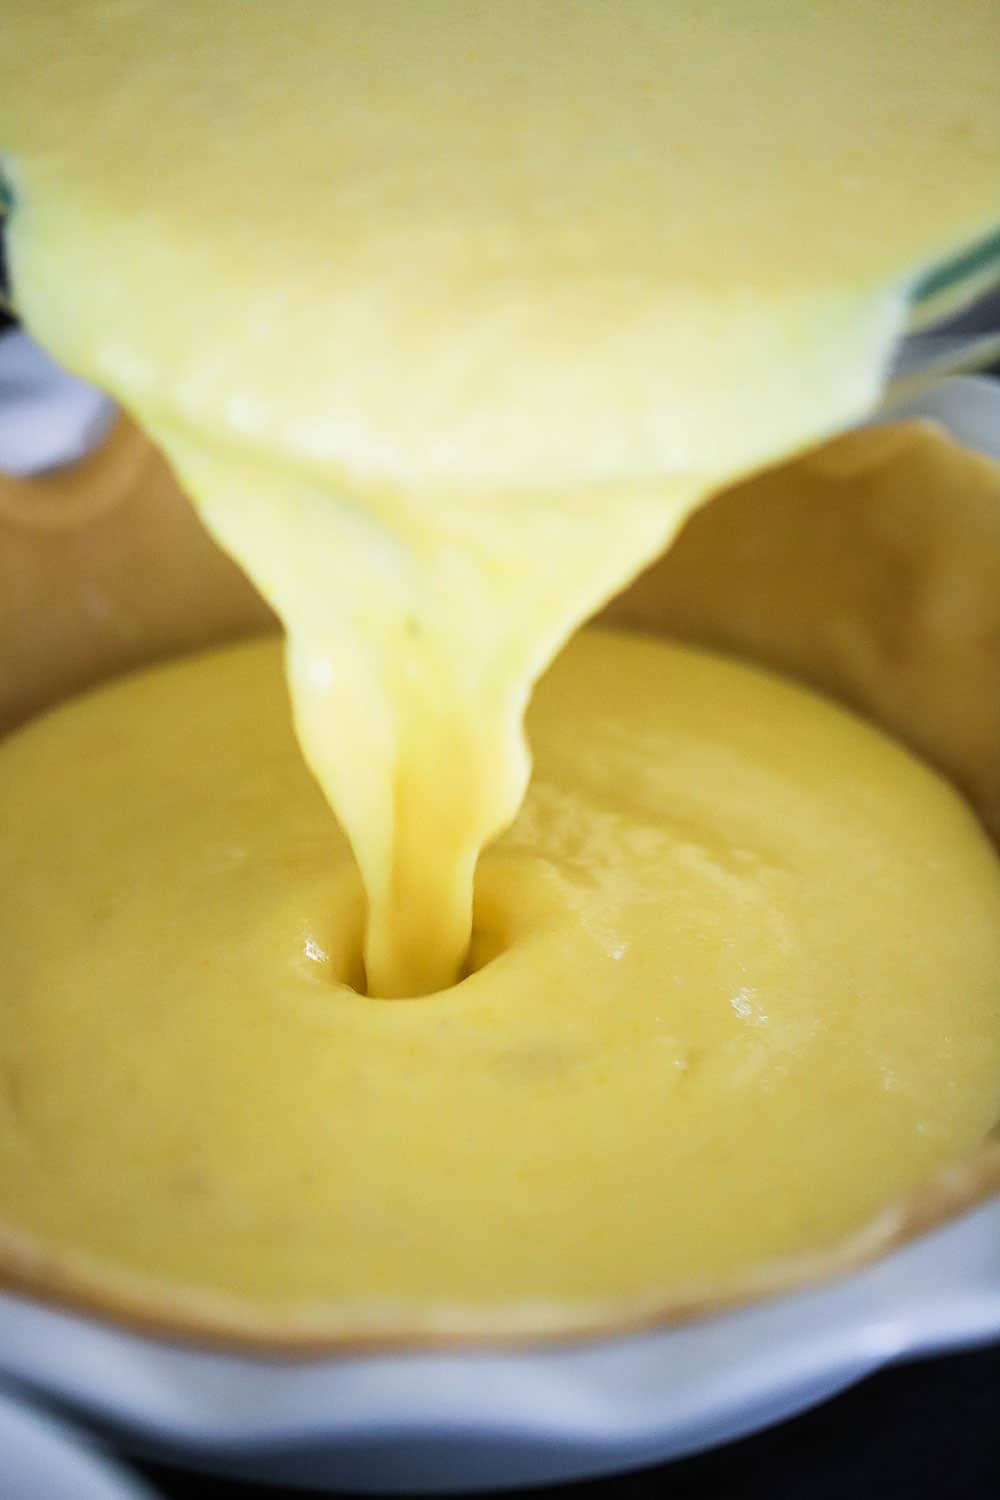 Yellow custard being poured into a pie dish filled with a baked pie crust.